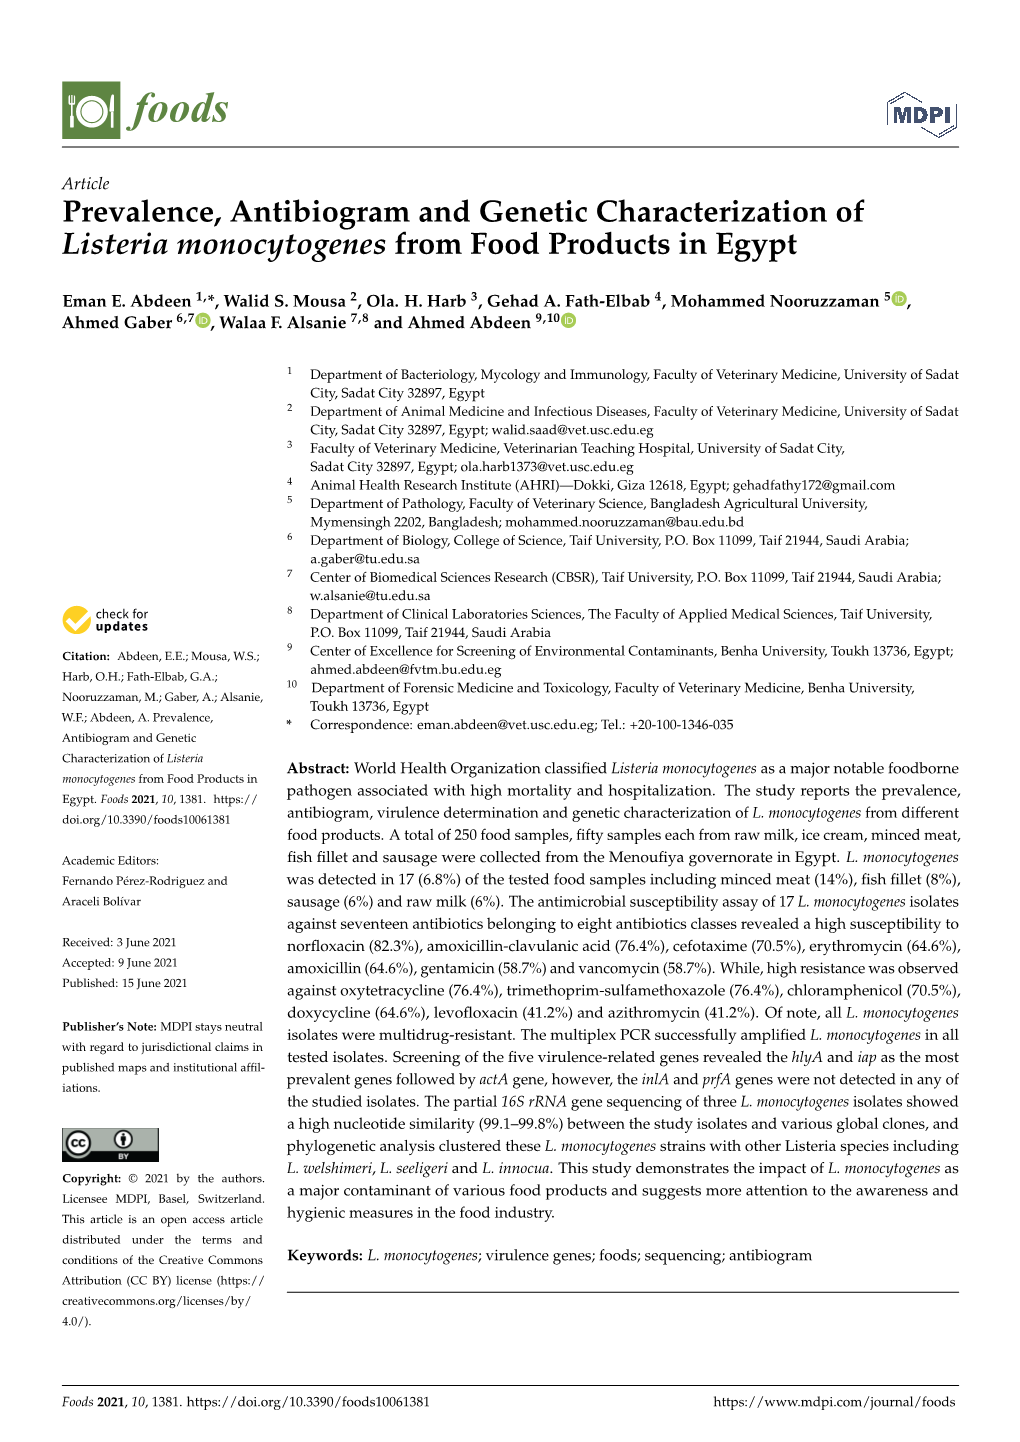 Prevalence, Antibiogram and Genetic Characterization of Listeria Monocytogenes from Food Products in Egypt